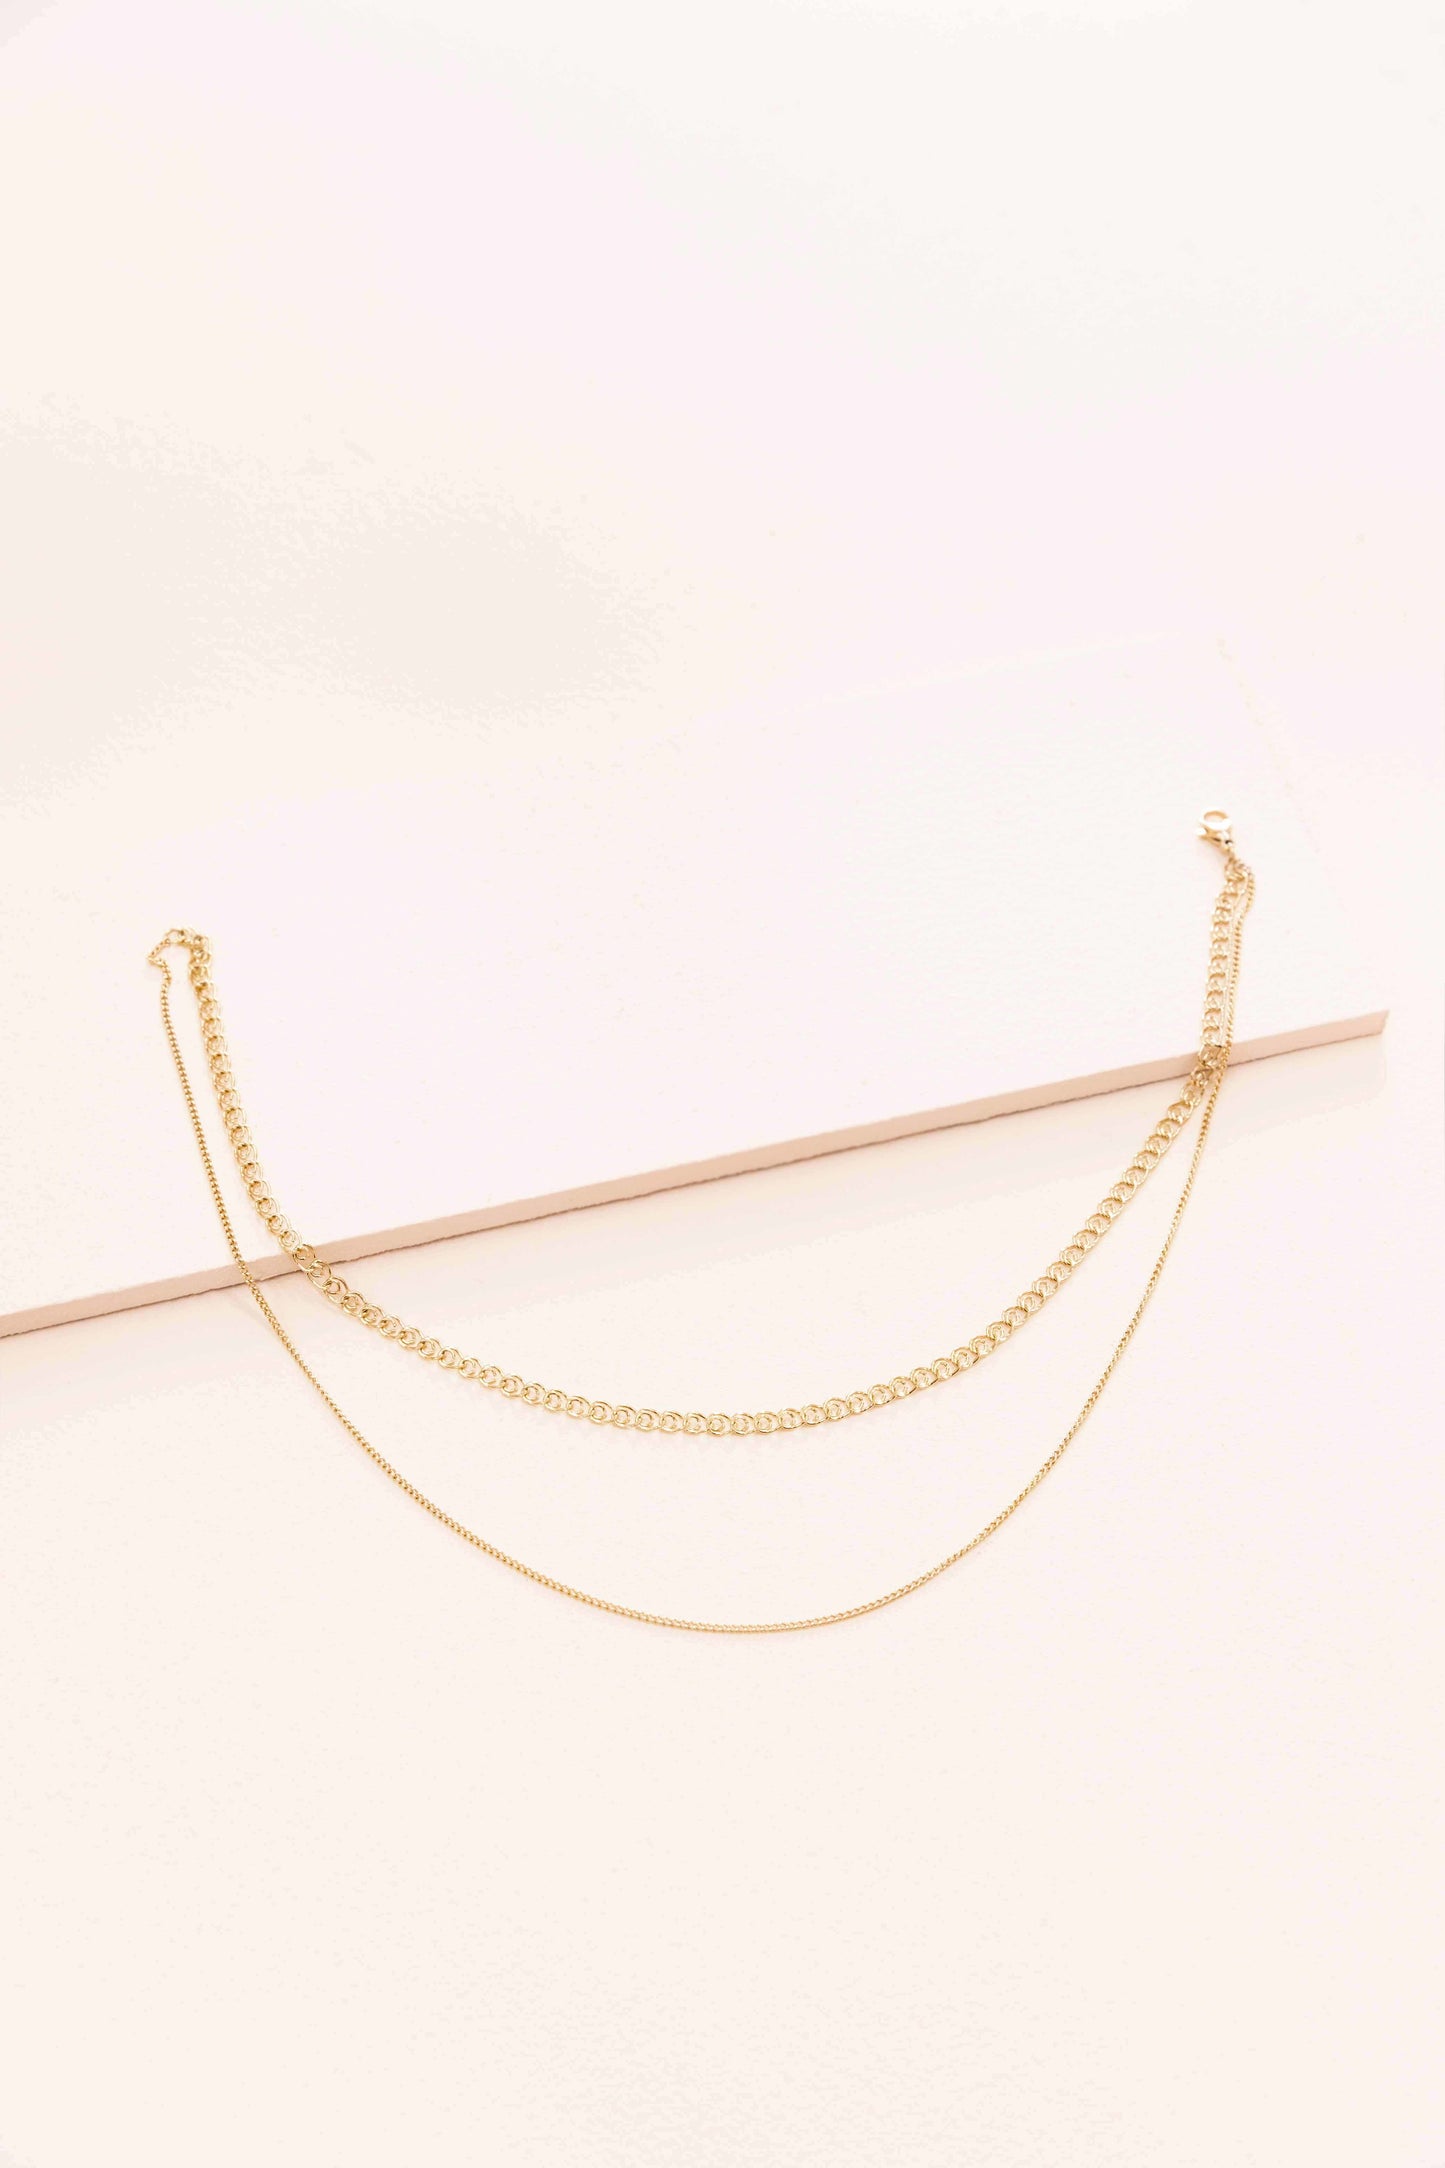 Through Thick and Thin Necklace (14K)